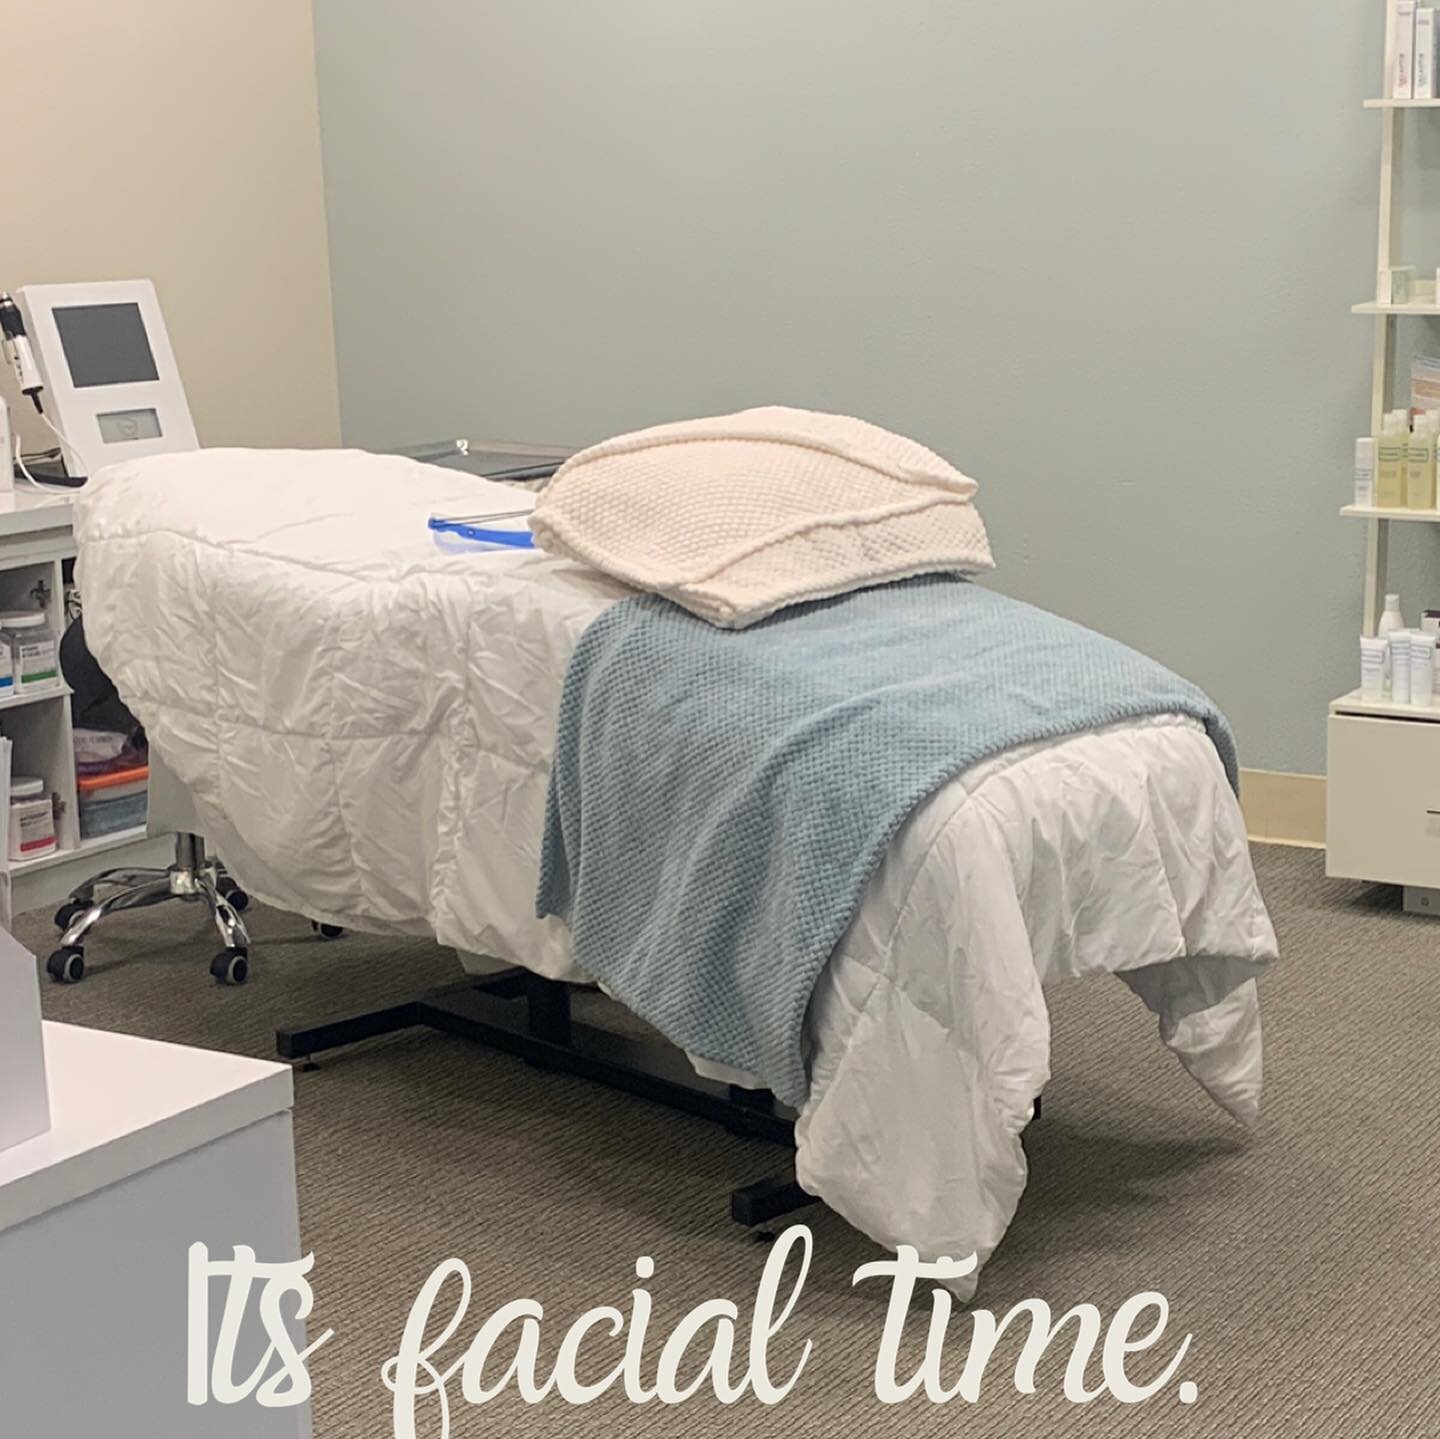 New place in Pleasanton! 
The room is still in the midst of decor, but I&rsquo;m set up to safely see clients. 

DM me or go to my website www.dermal911.com to book an appointment!